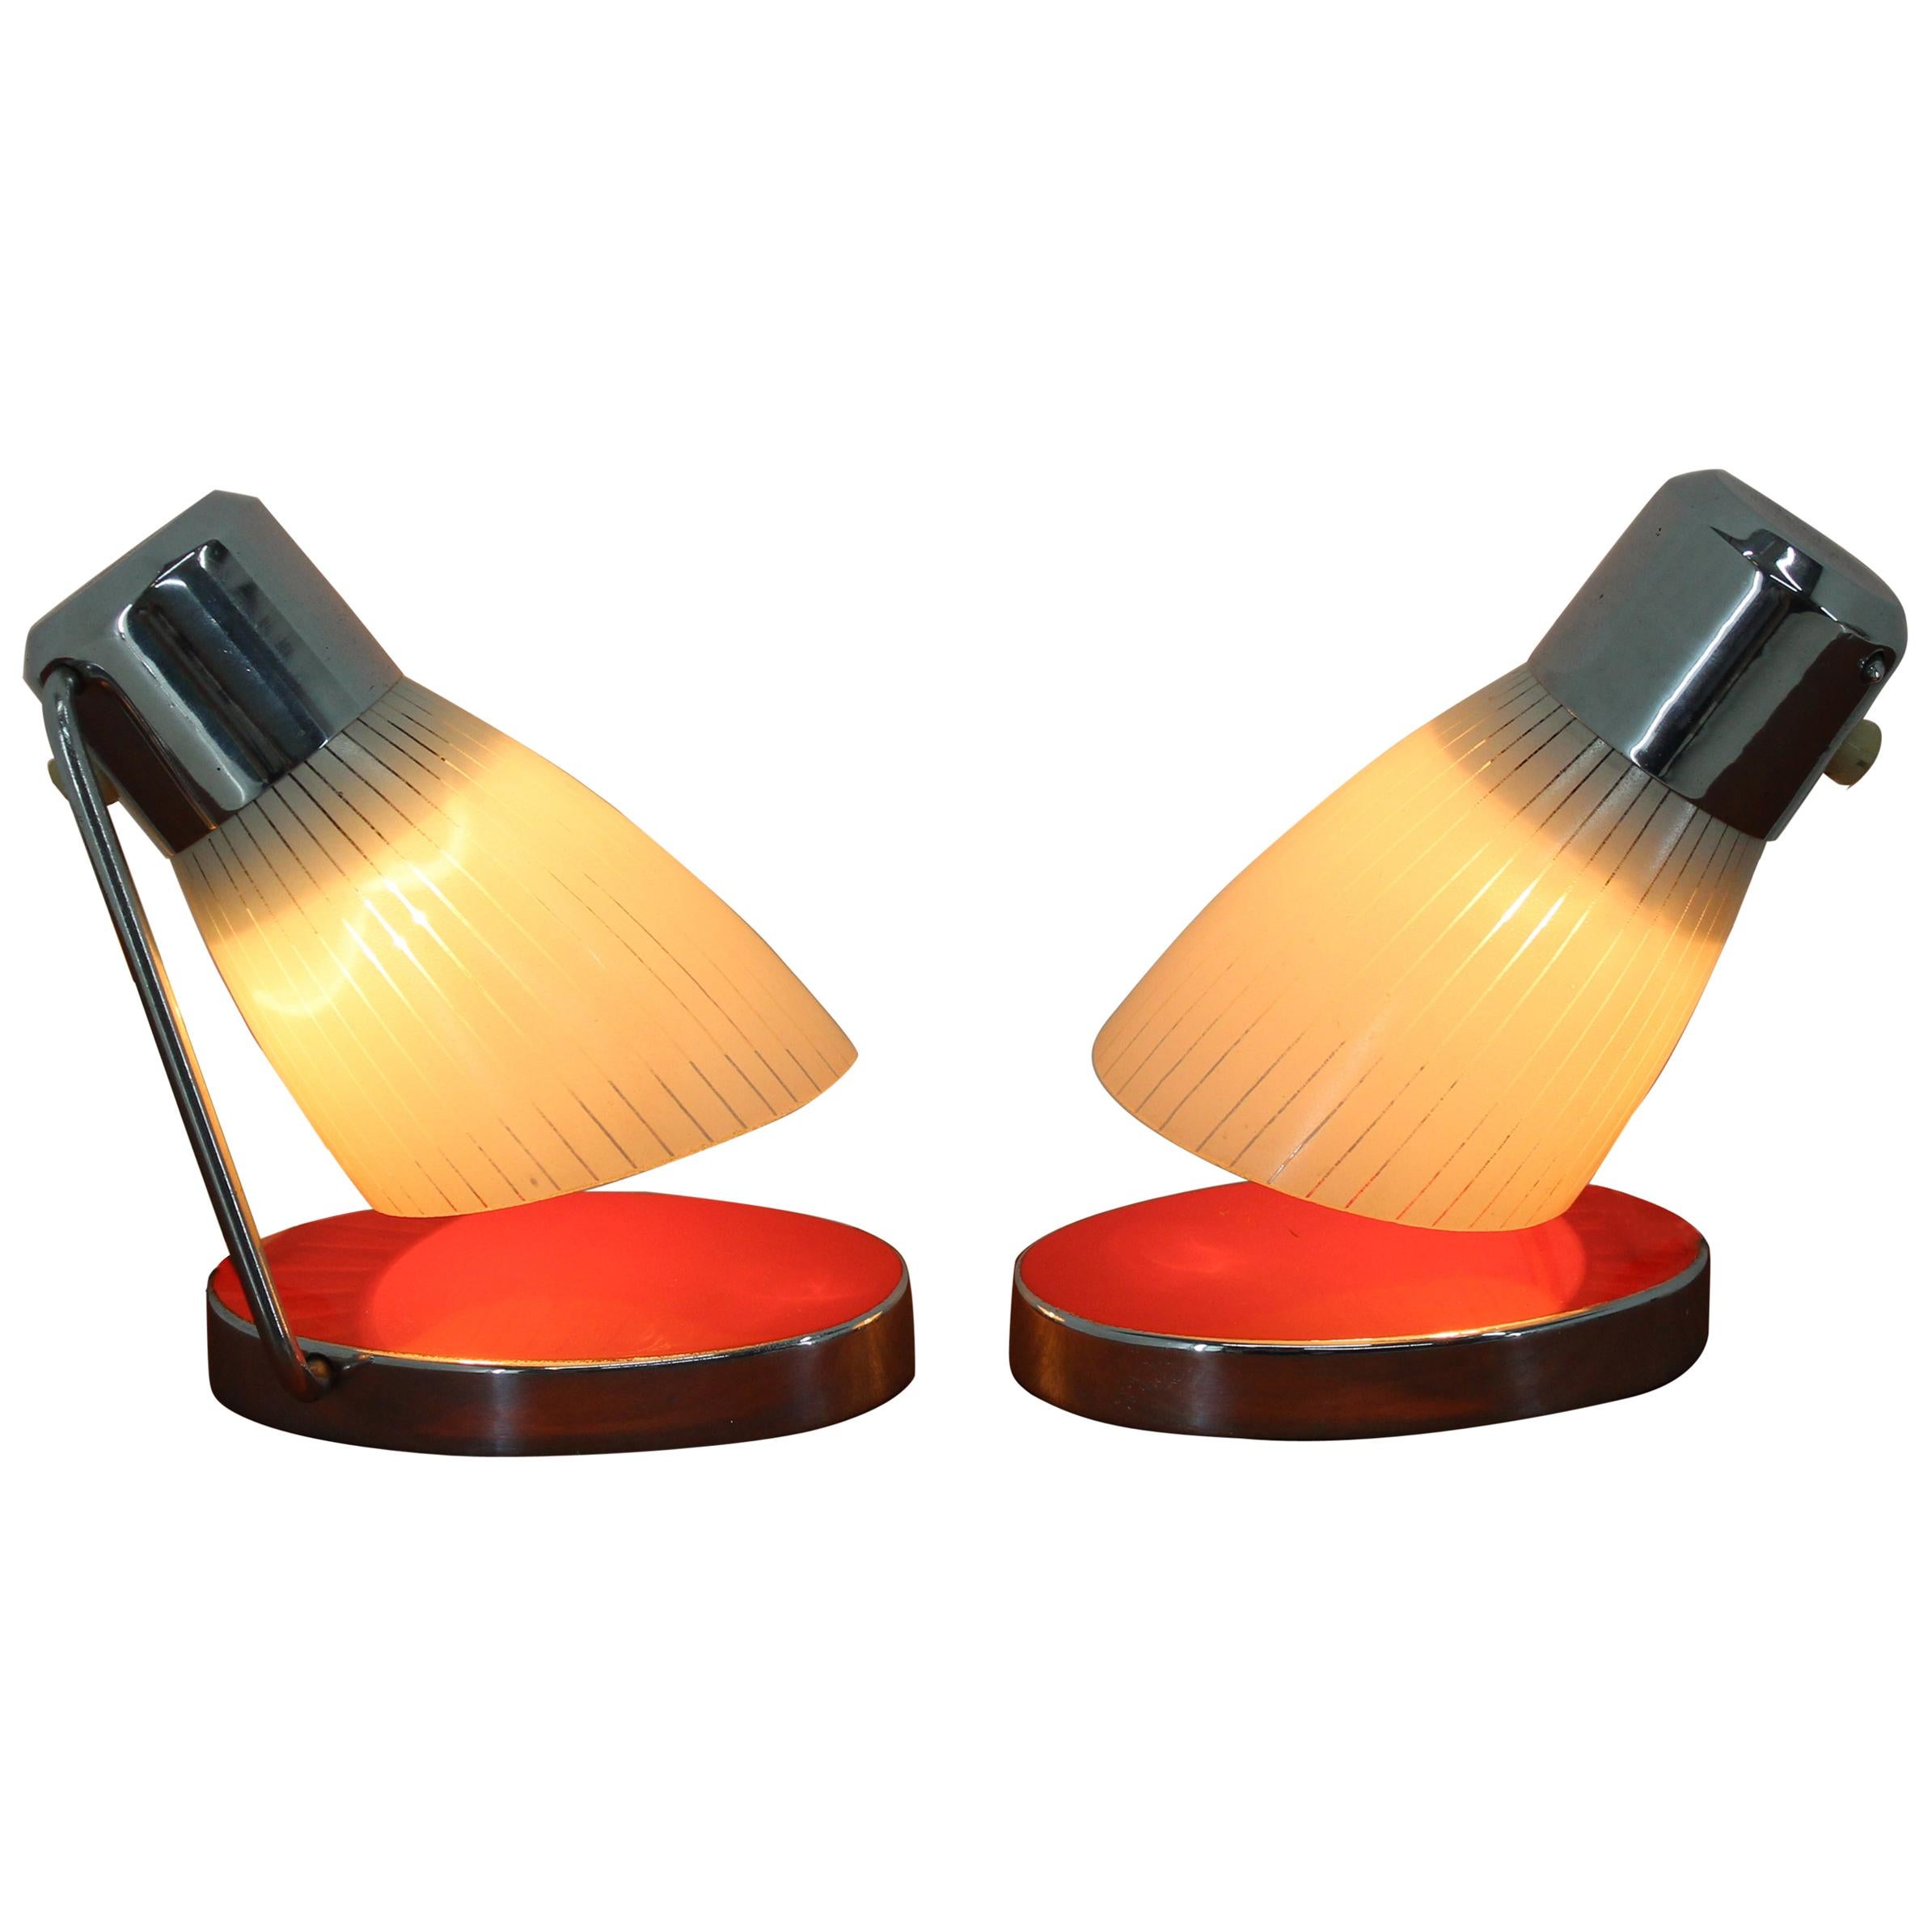 Pair of Midcentury Table Lamps by Drupol, 1960s